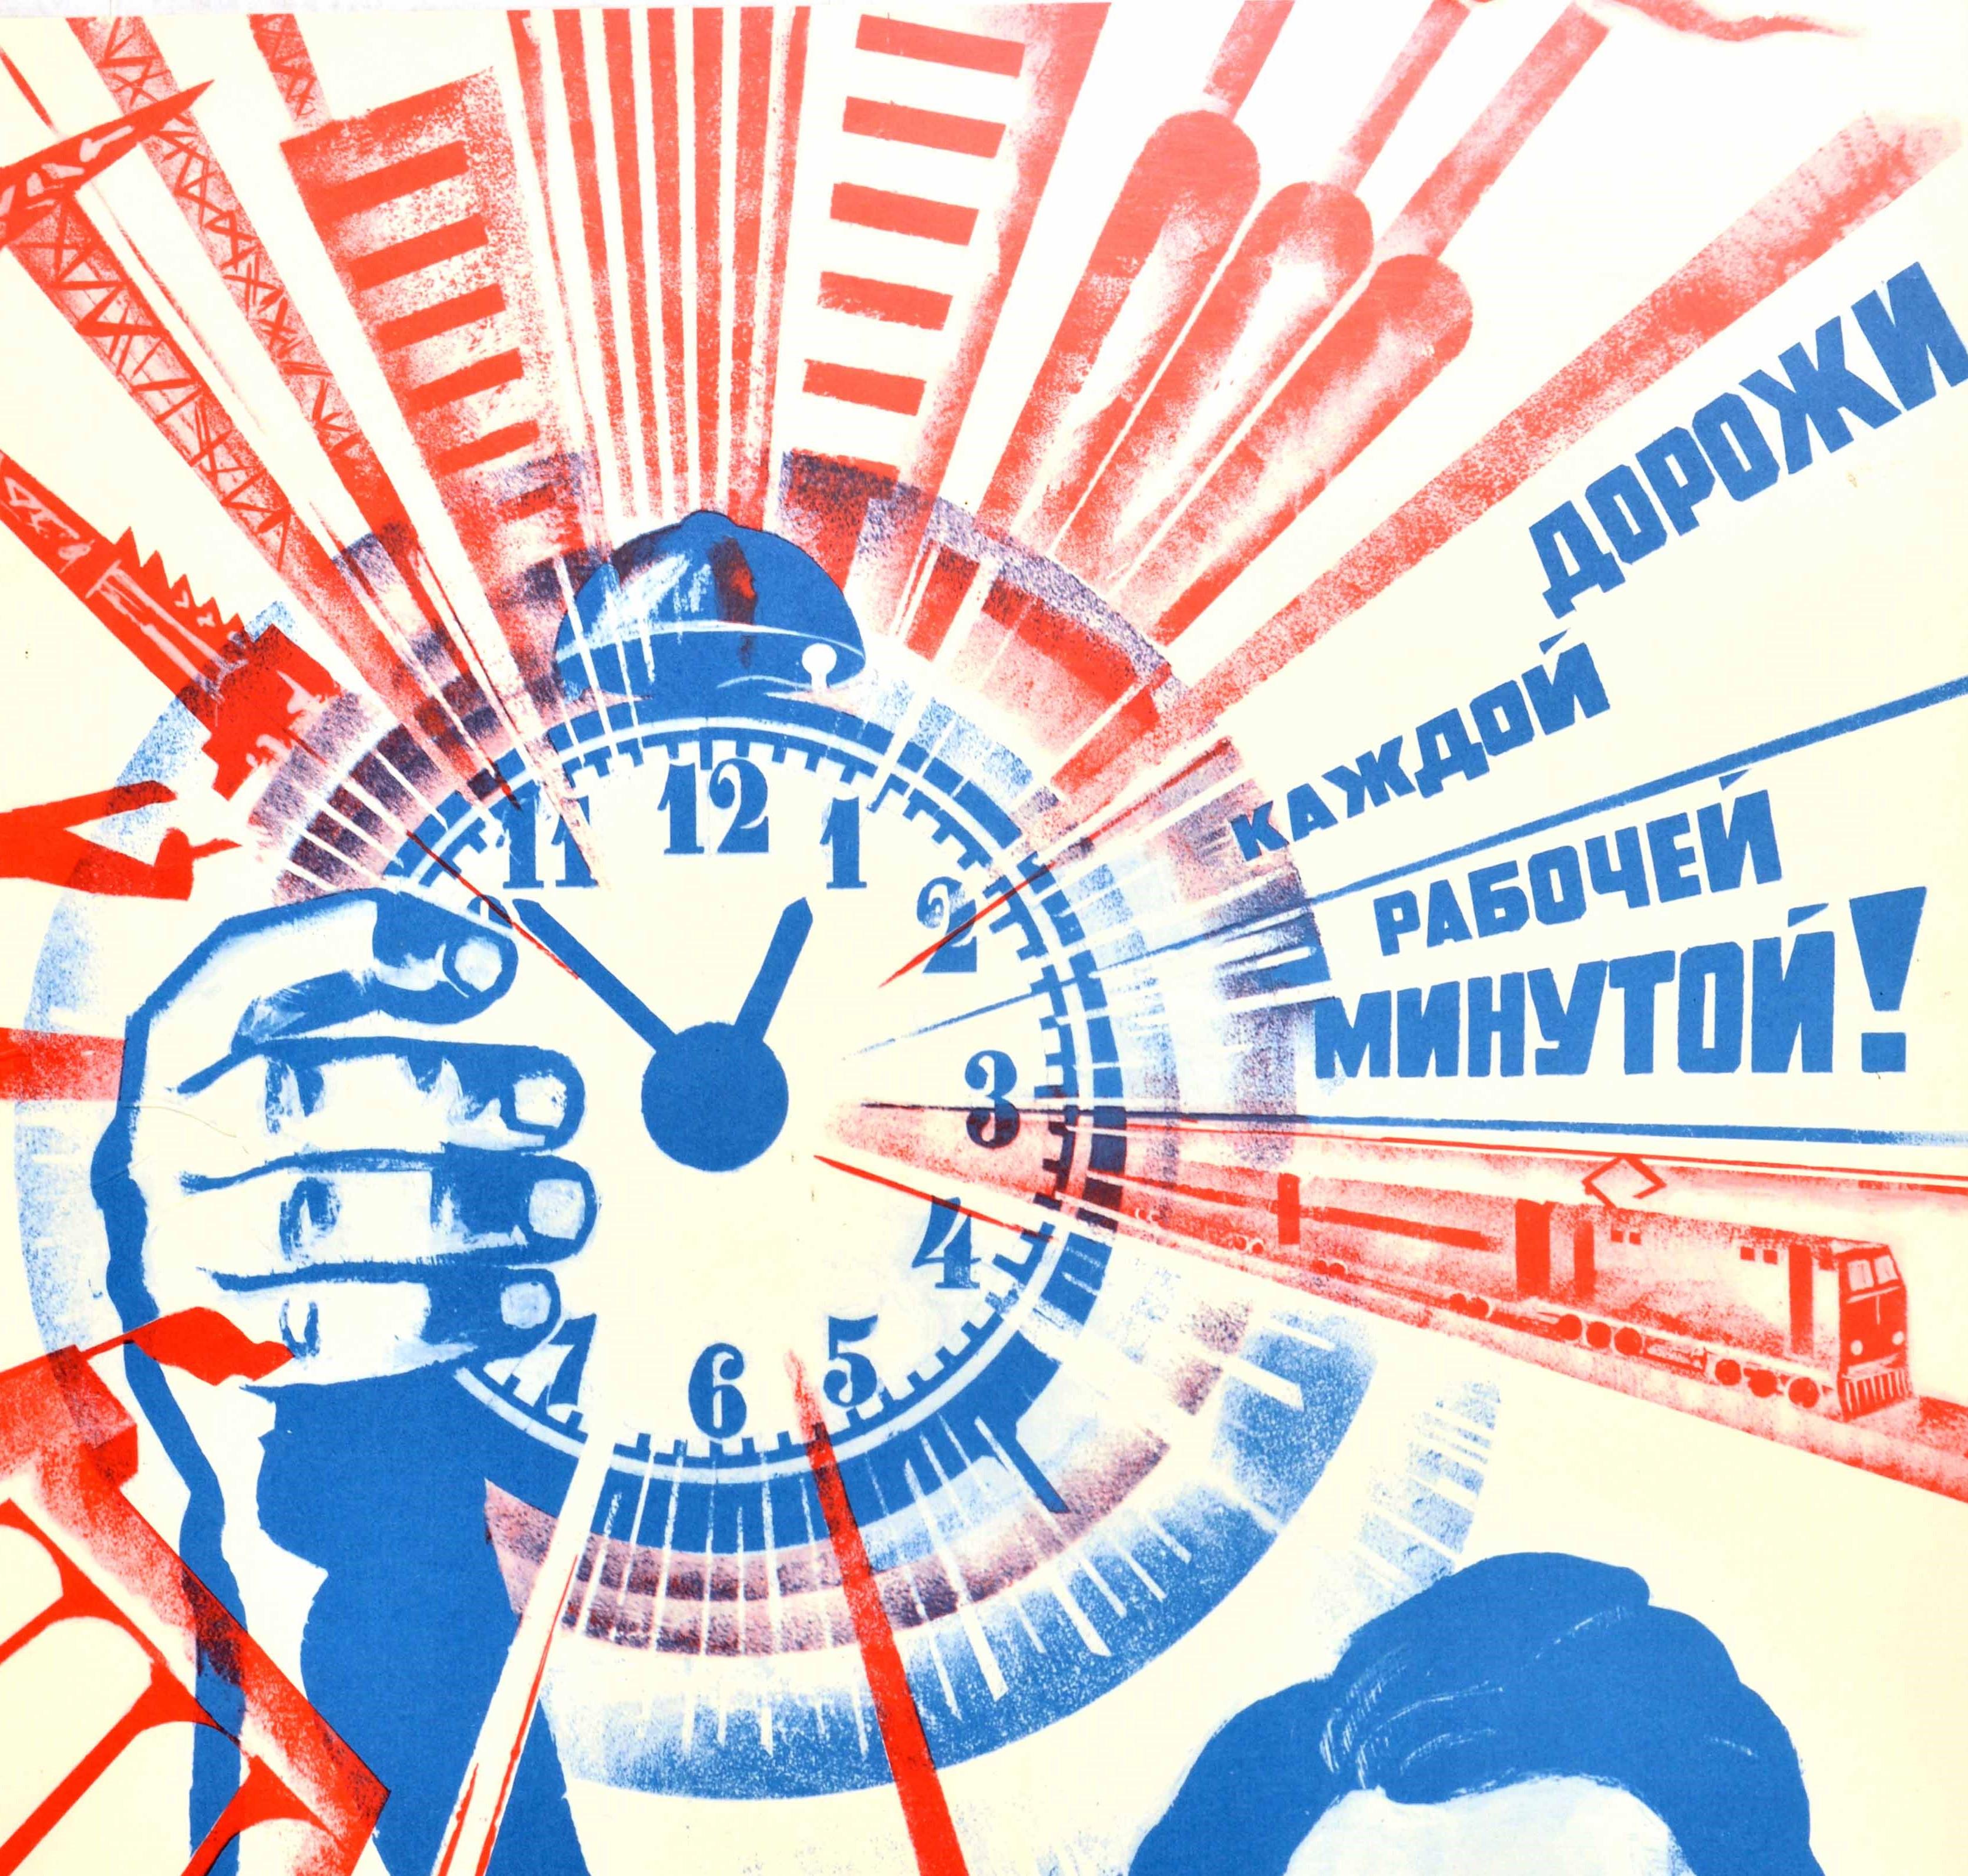 Original vintage Soviet propaganda poster - Treasure every working minute - featuring a dynamic design depicting a worker holding up a clock in blue with working industrial images radiating from the centre including factories, cranes, building